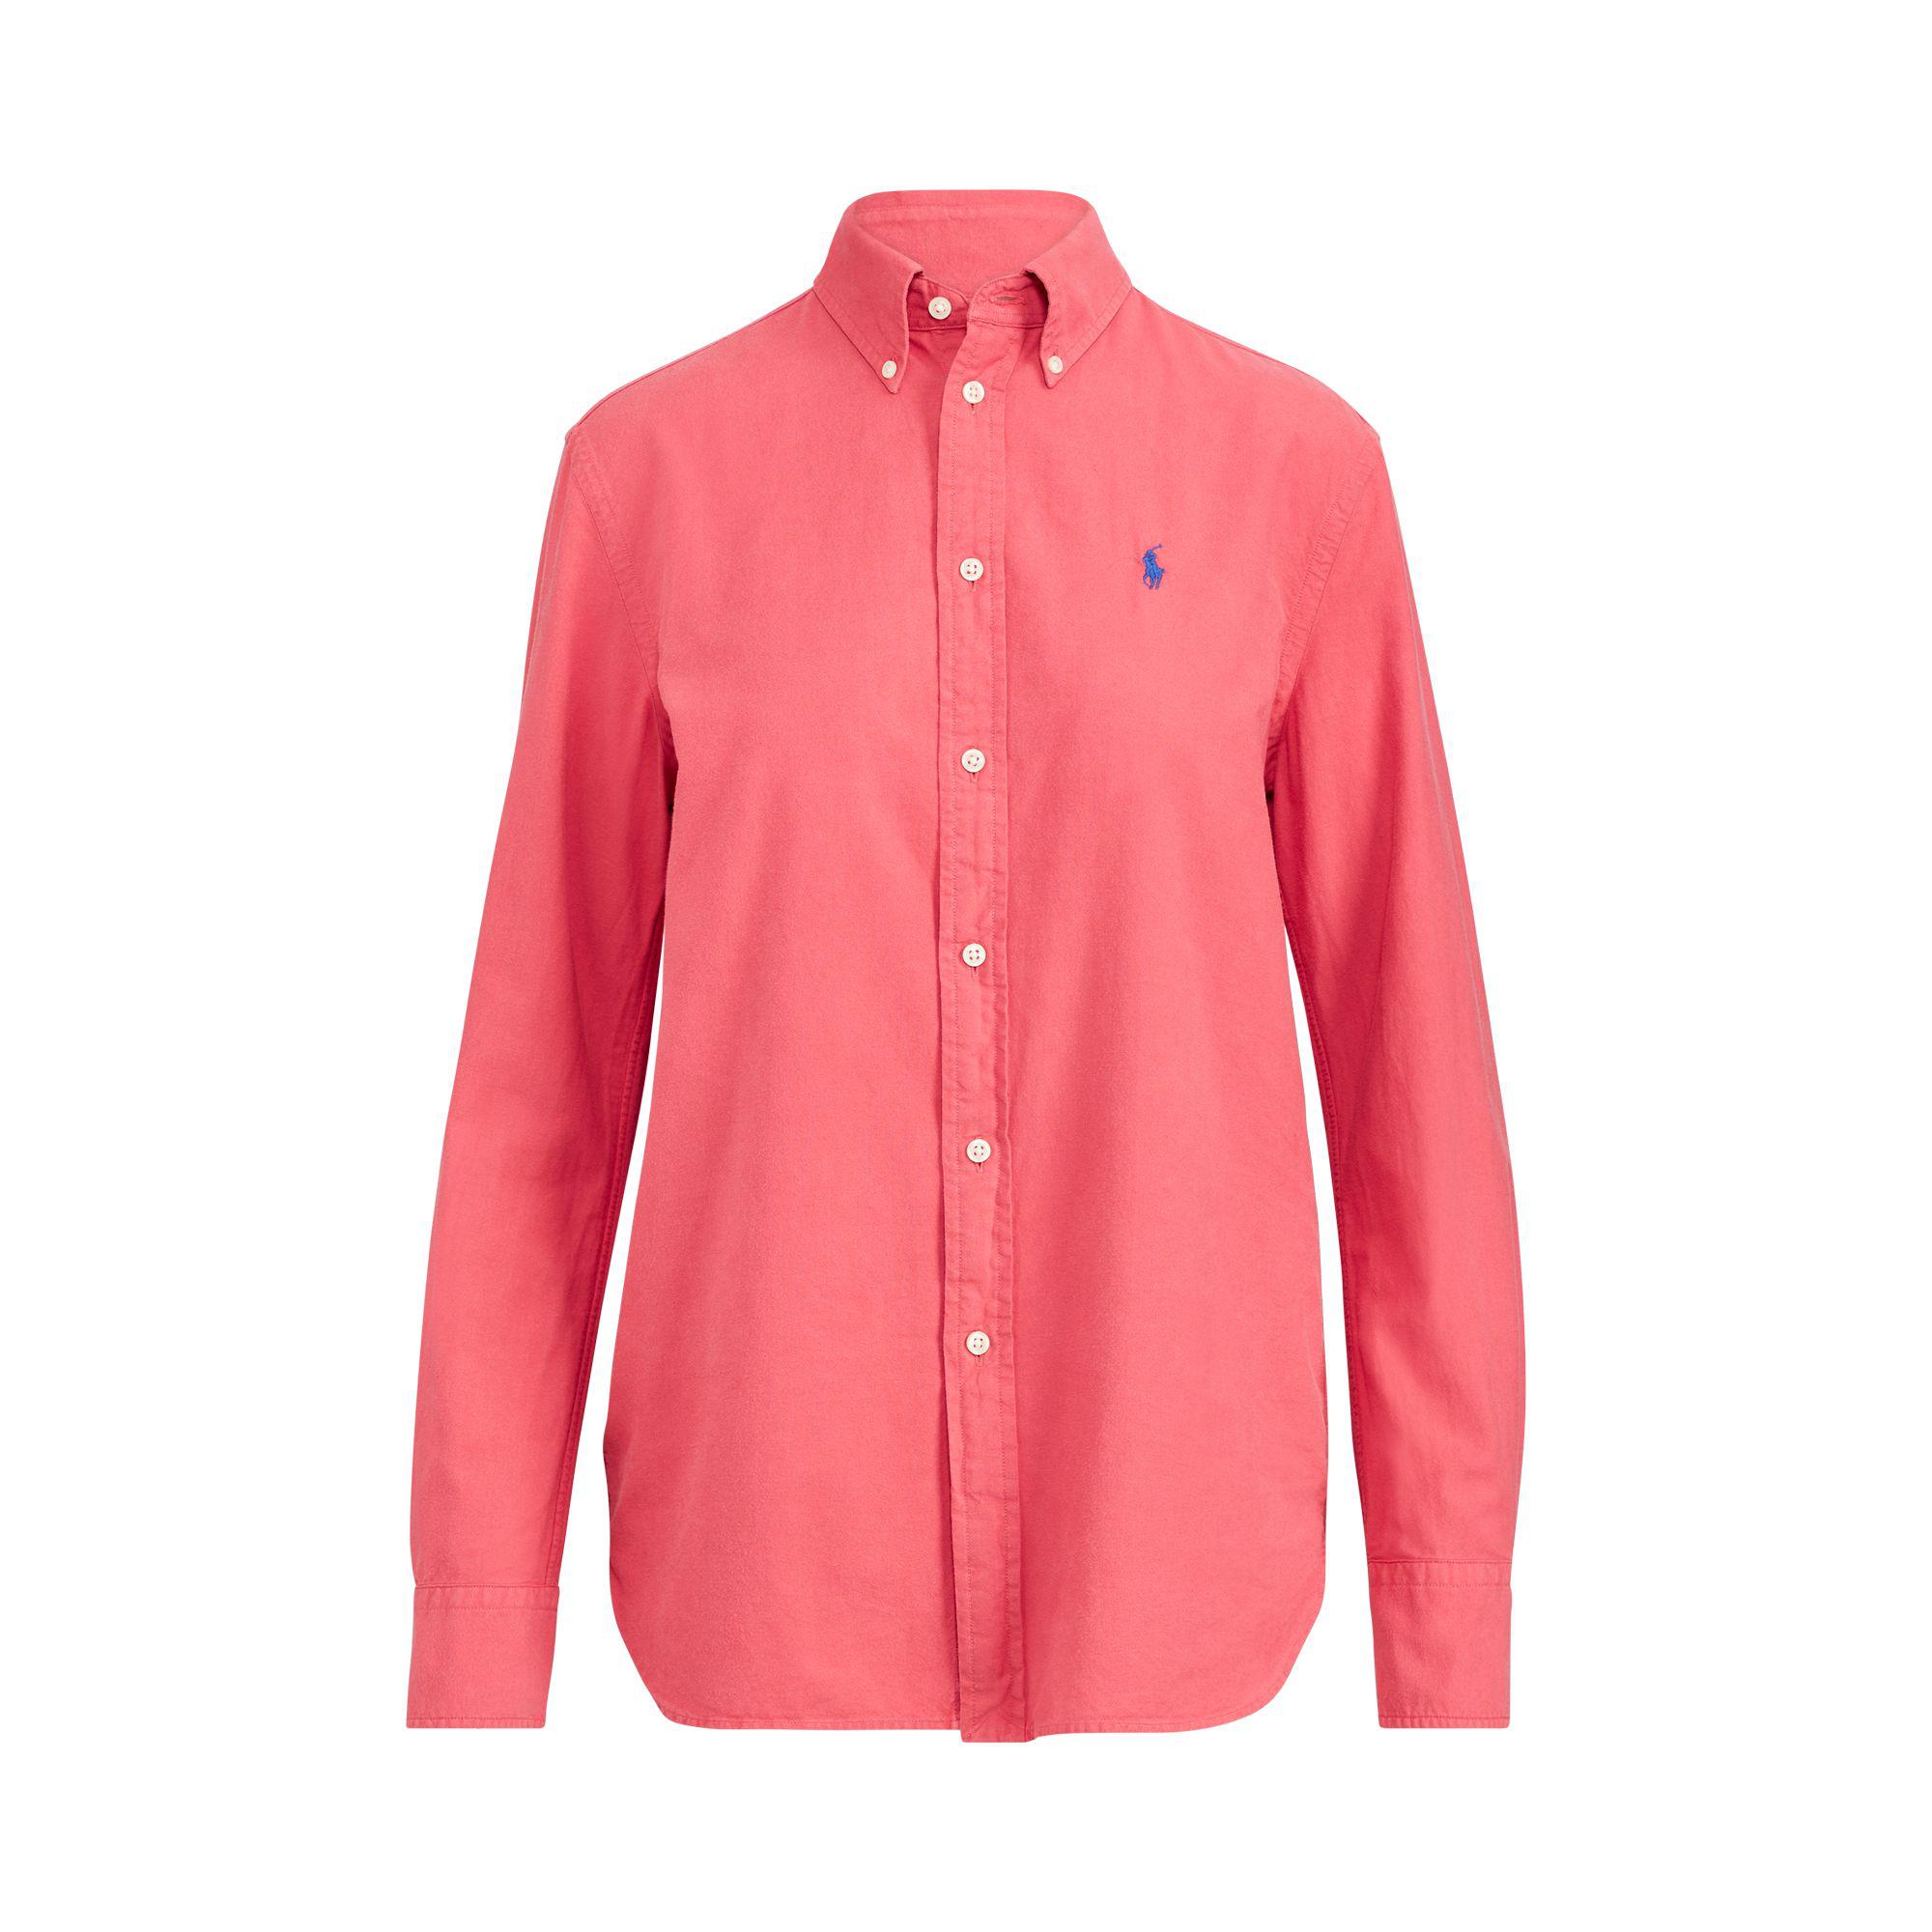 Polo Ralph Lauren Cotton Relaxed Fit Oxford Shirt in Red - Lyst